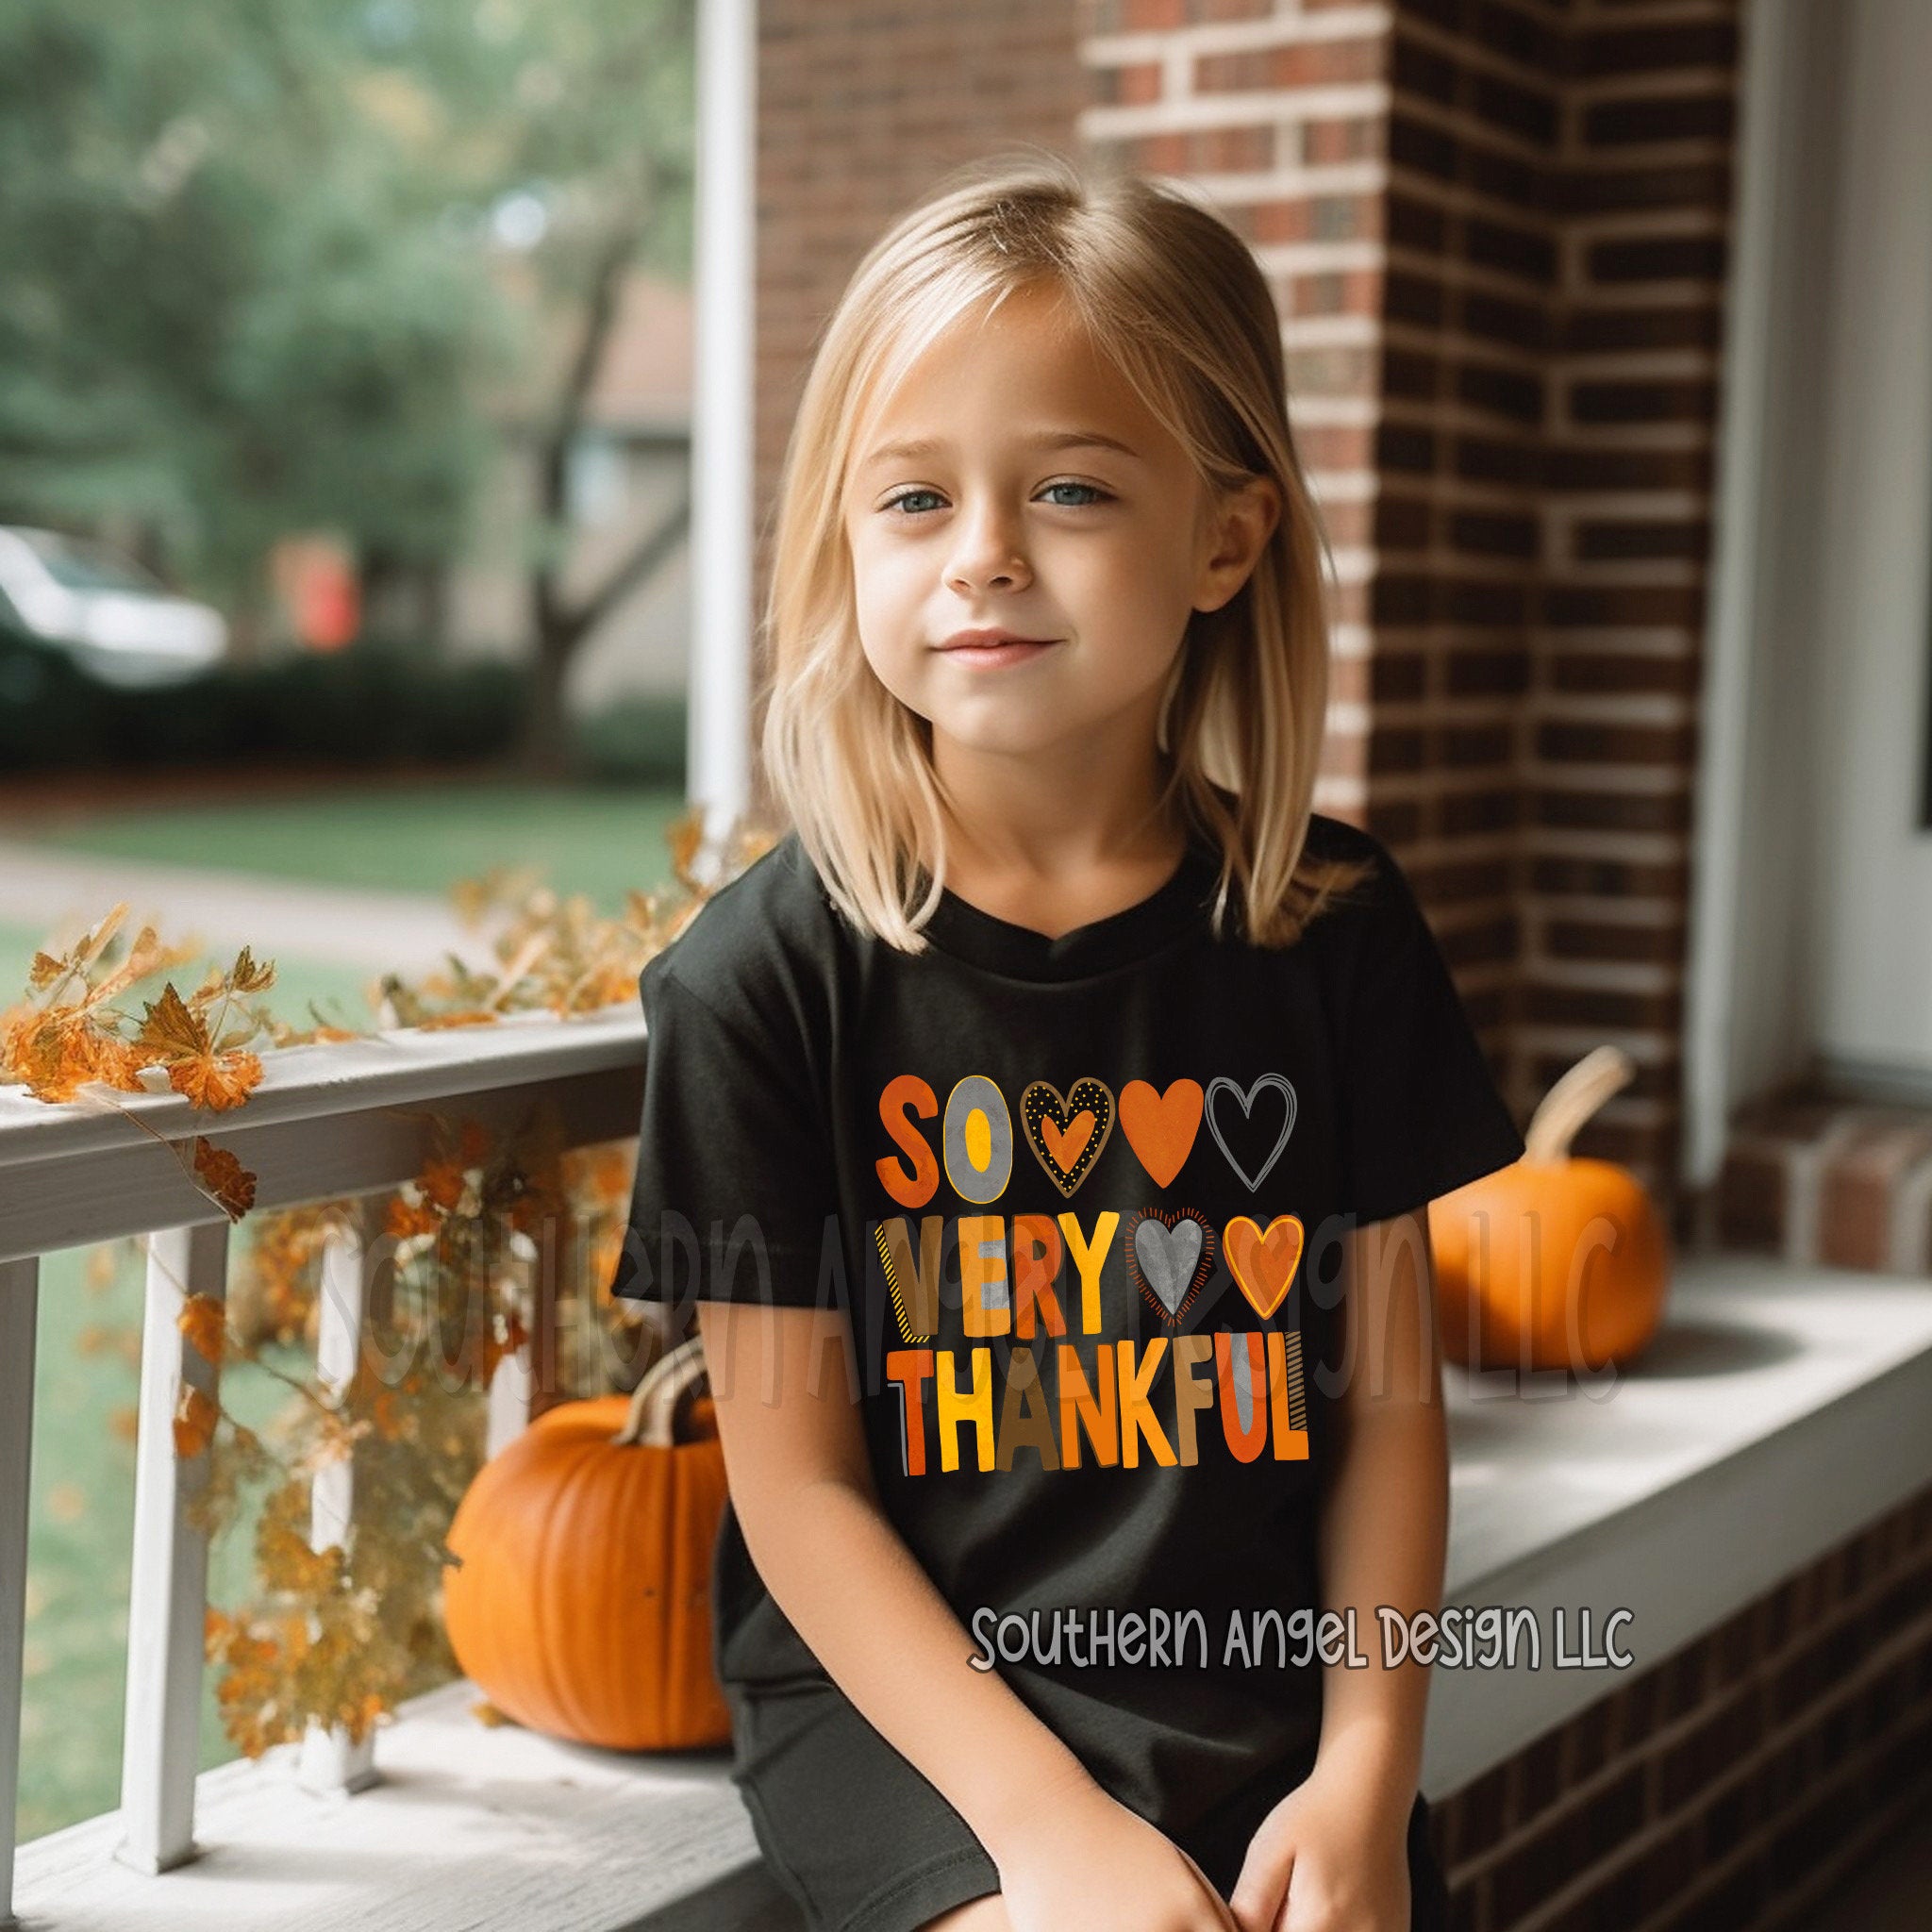 Give thanks to the Lord shirt, Retro Thanksgiving shirt, Kids thanksgiving shirt, Girls thanksgiving Graphic Tee, Boys thanksgiving shirt